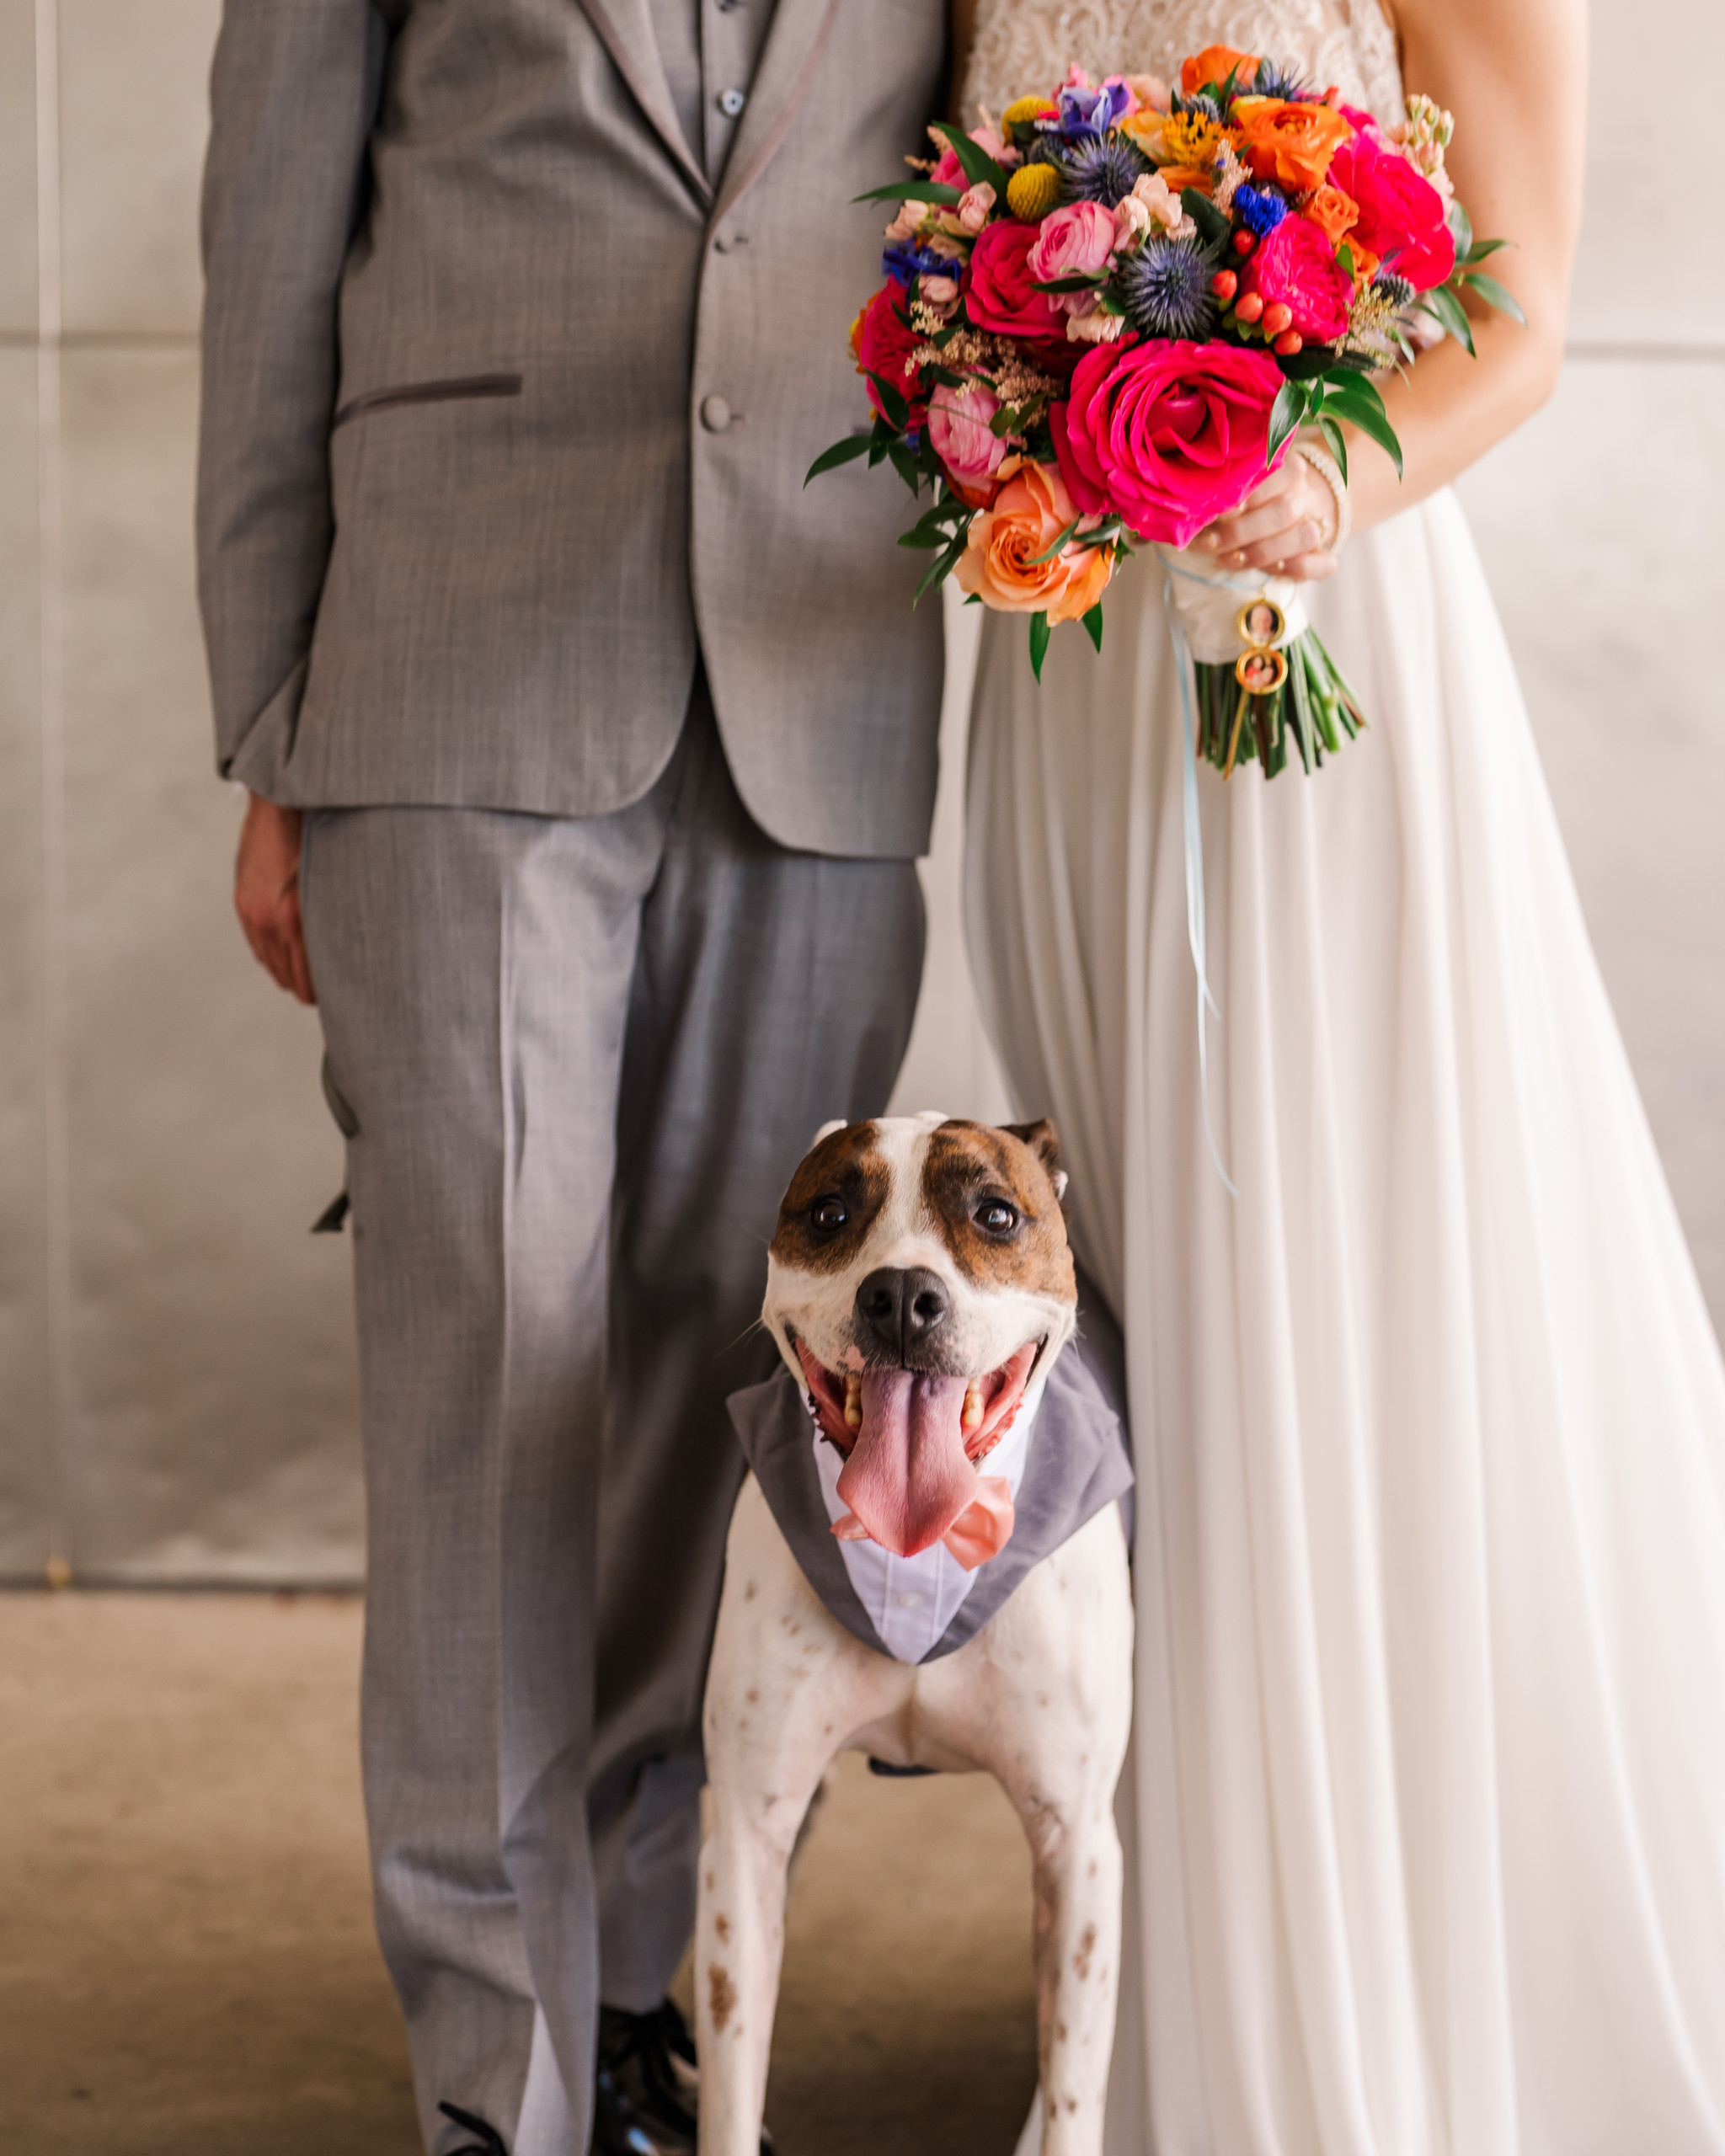 Wedding Day and the Dog